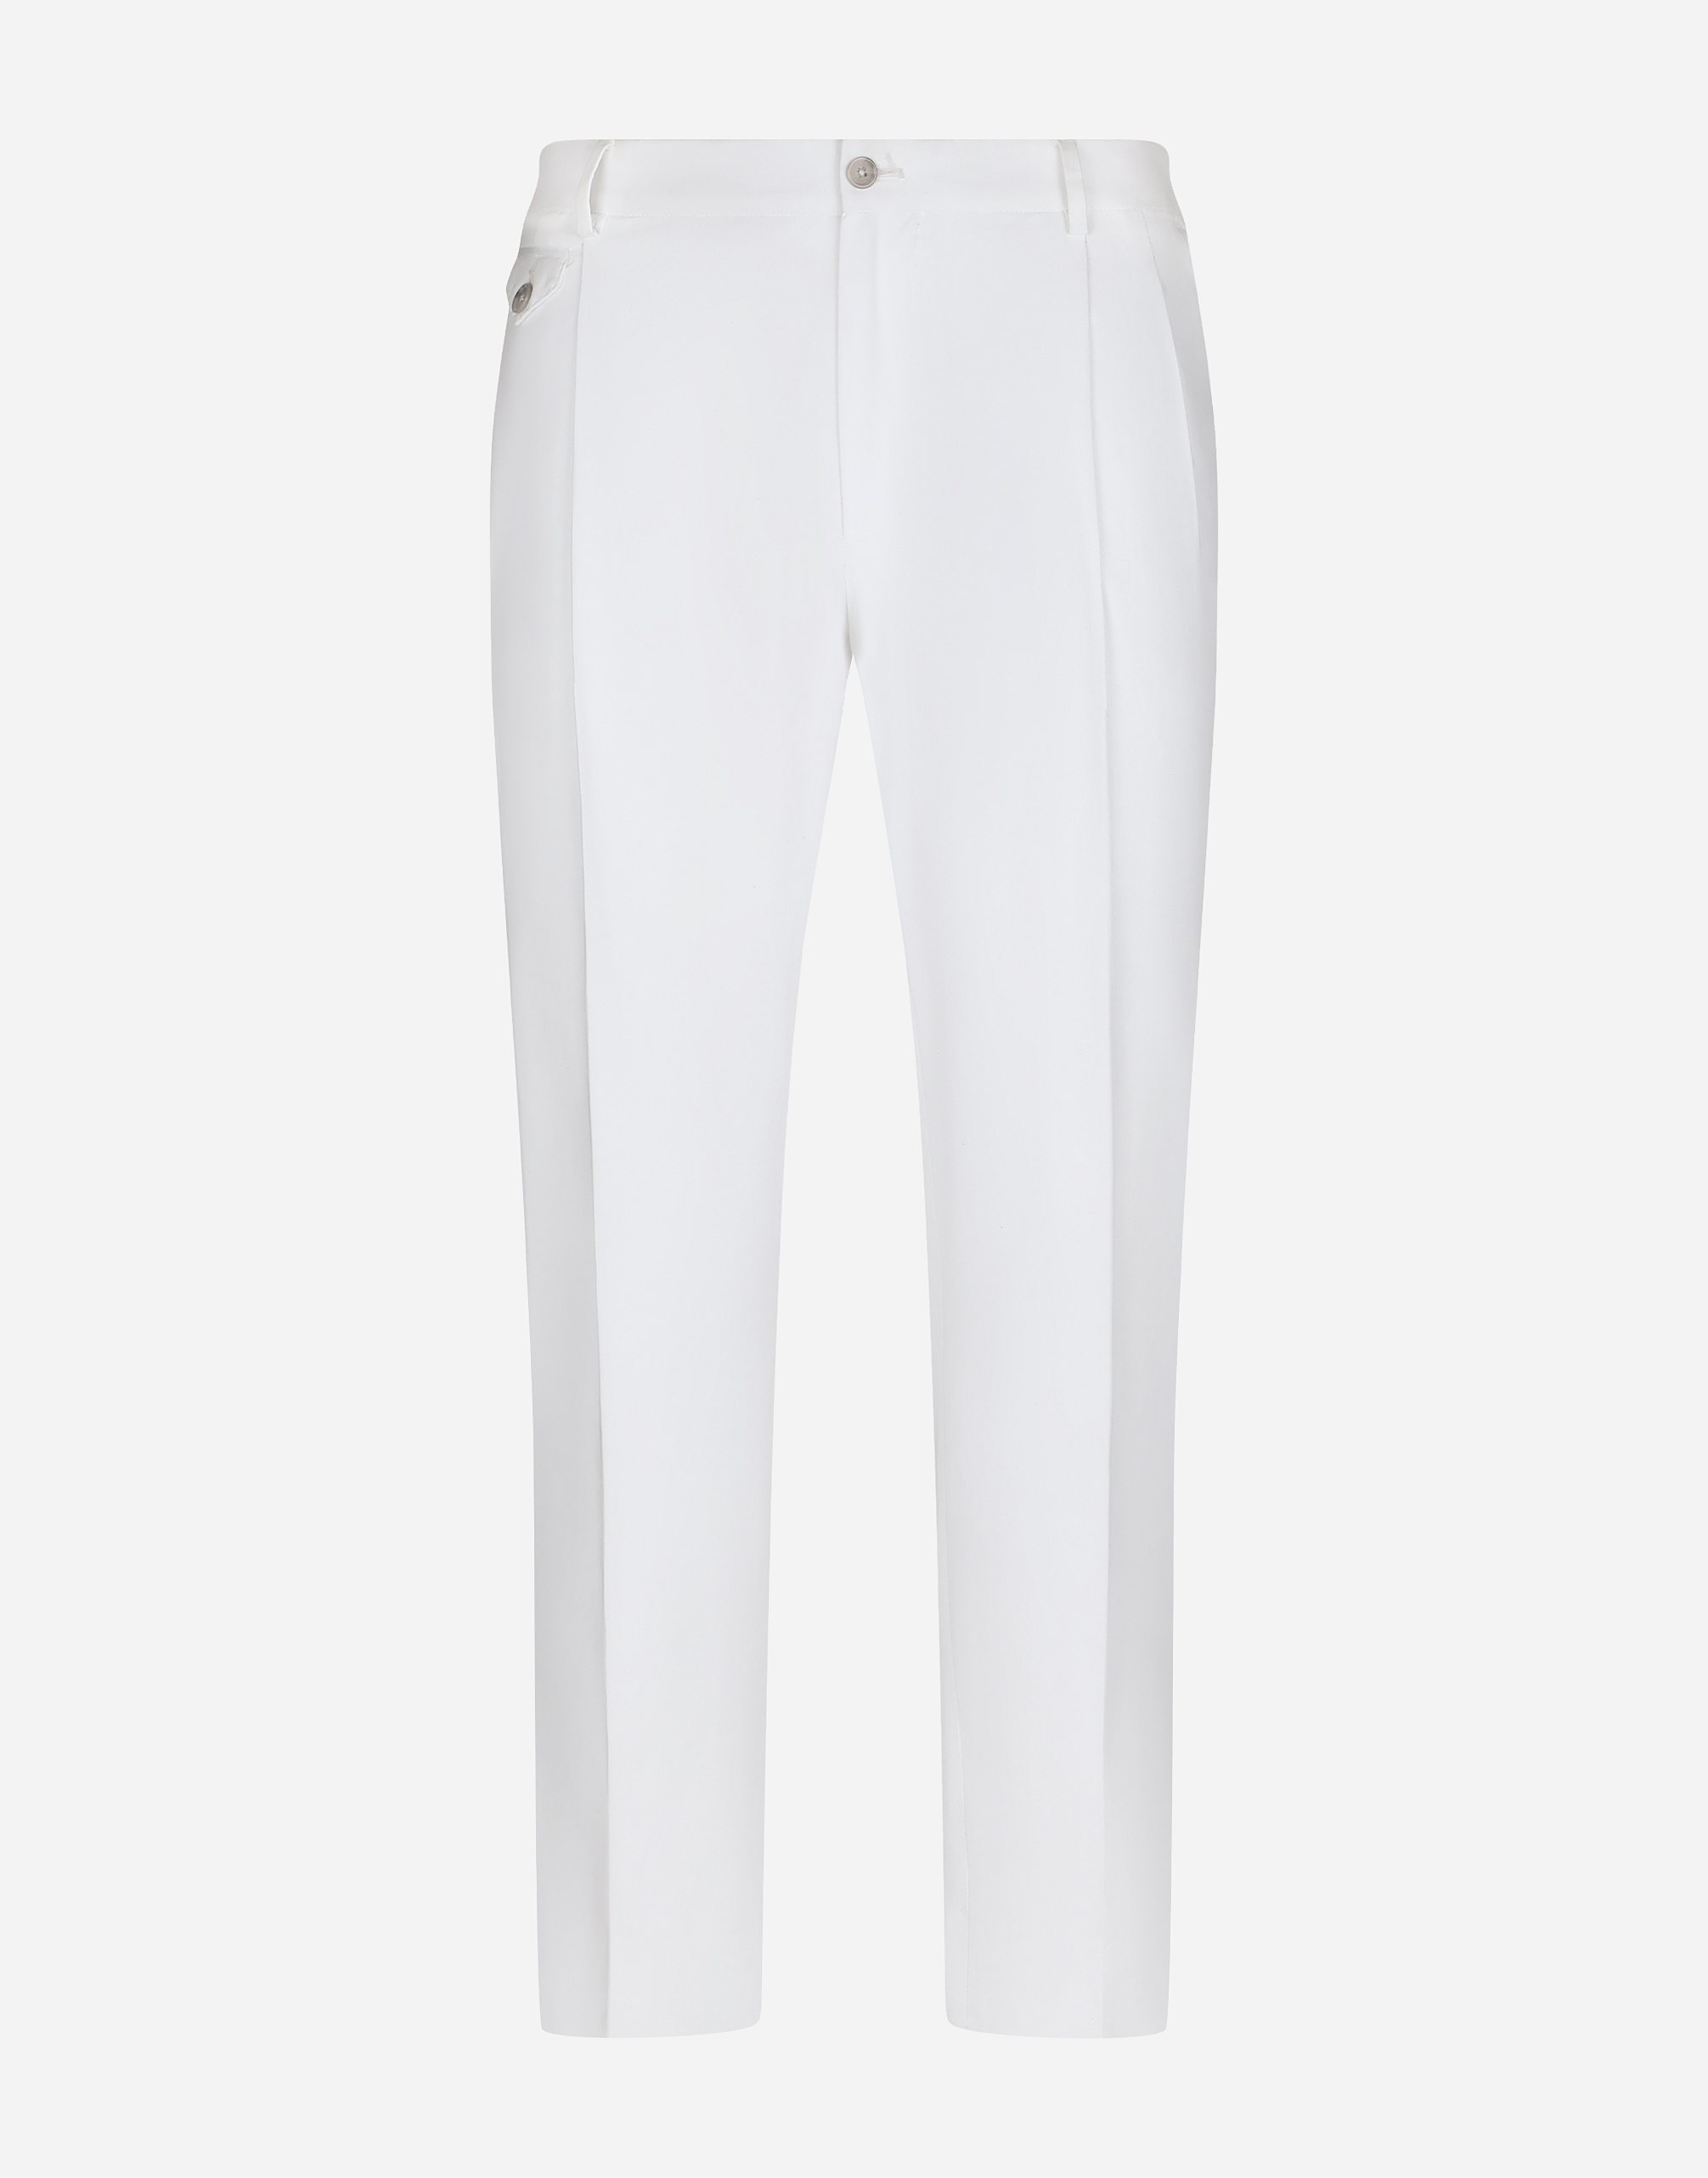 Stretch cotton pants in White